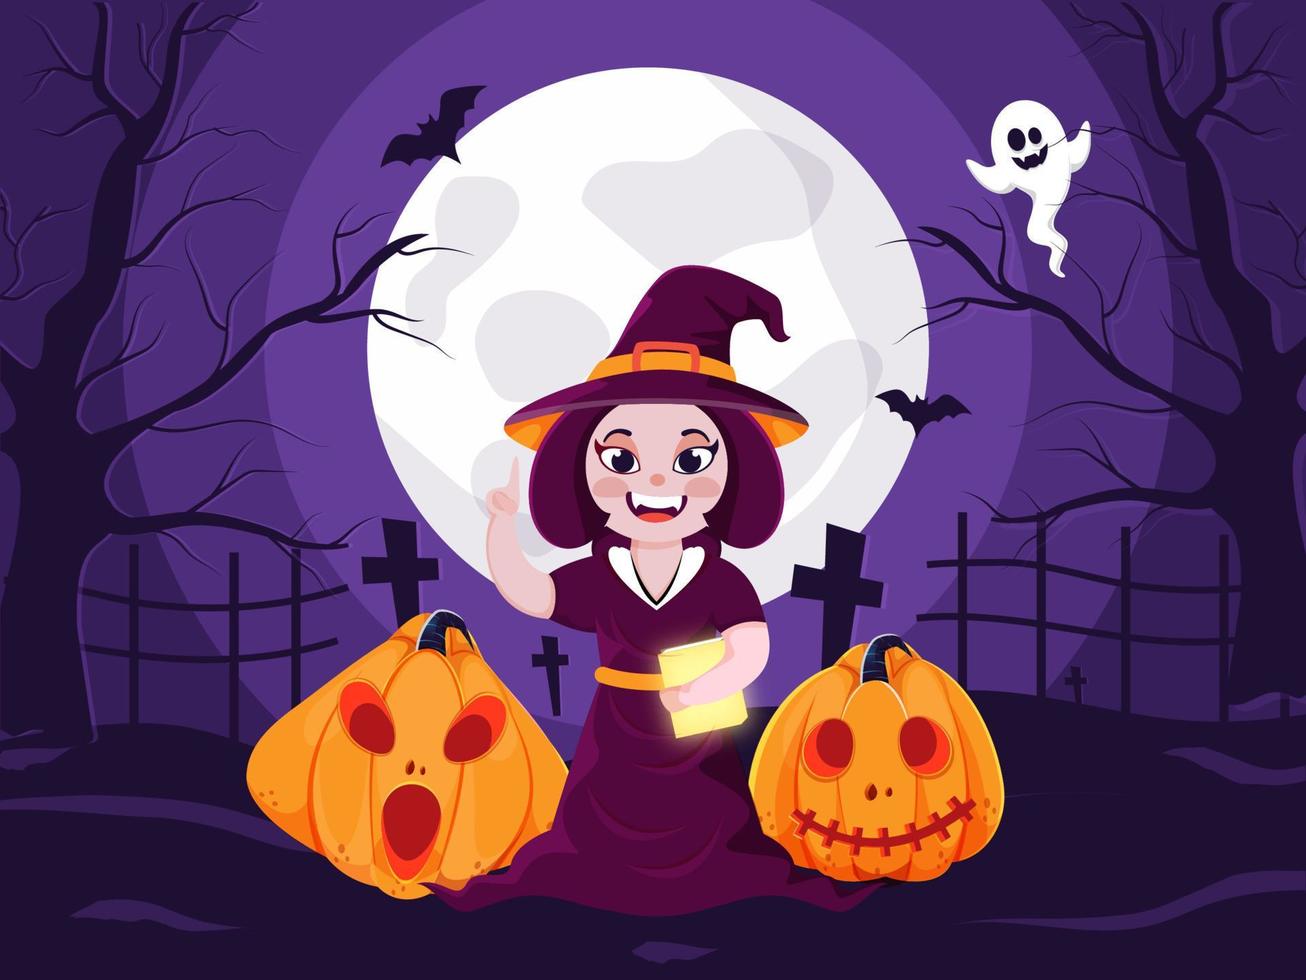 Illustration of Cheerful Witch Holding Book with Jack-O-Lanterns, Flying Bats and Ghost on Full Moon Purple Graveyard View Background. vector